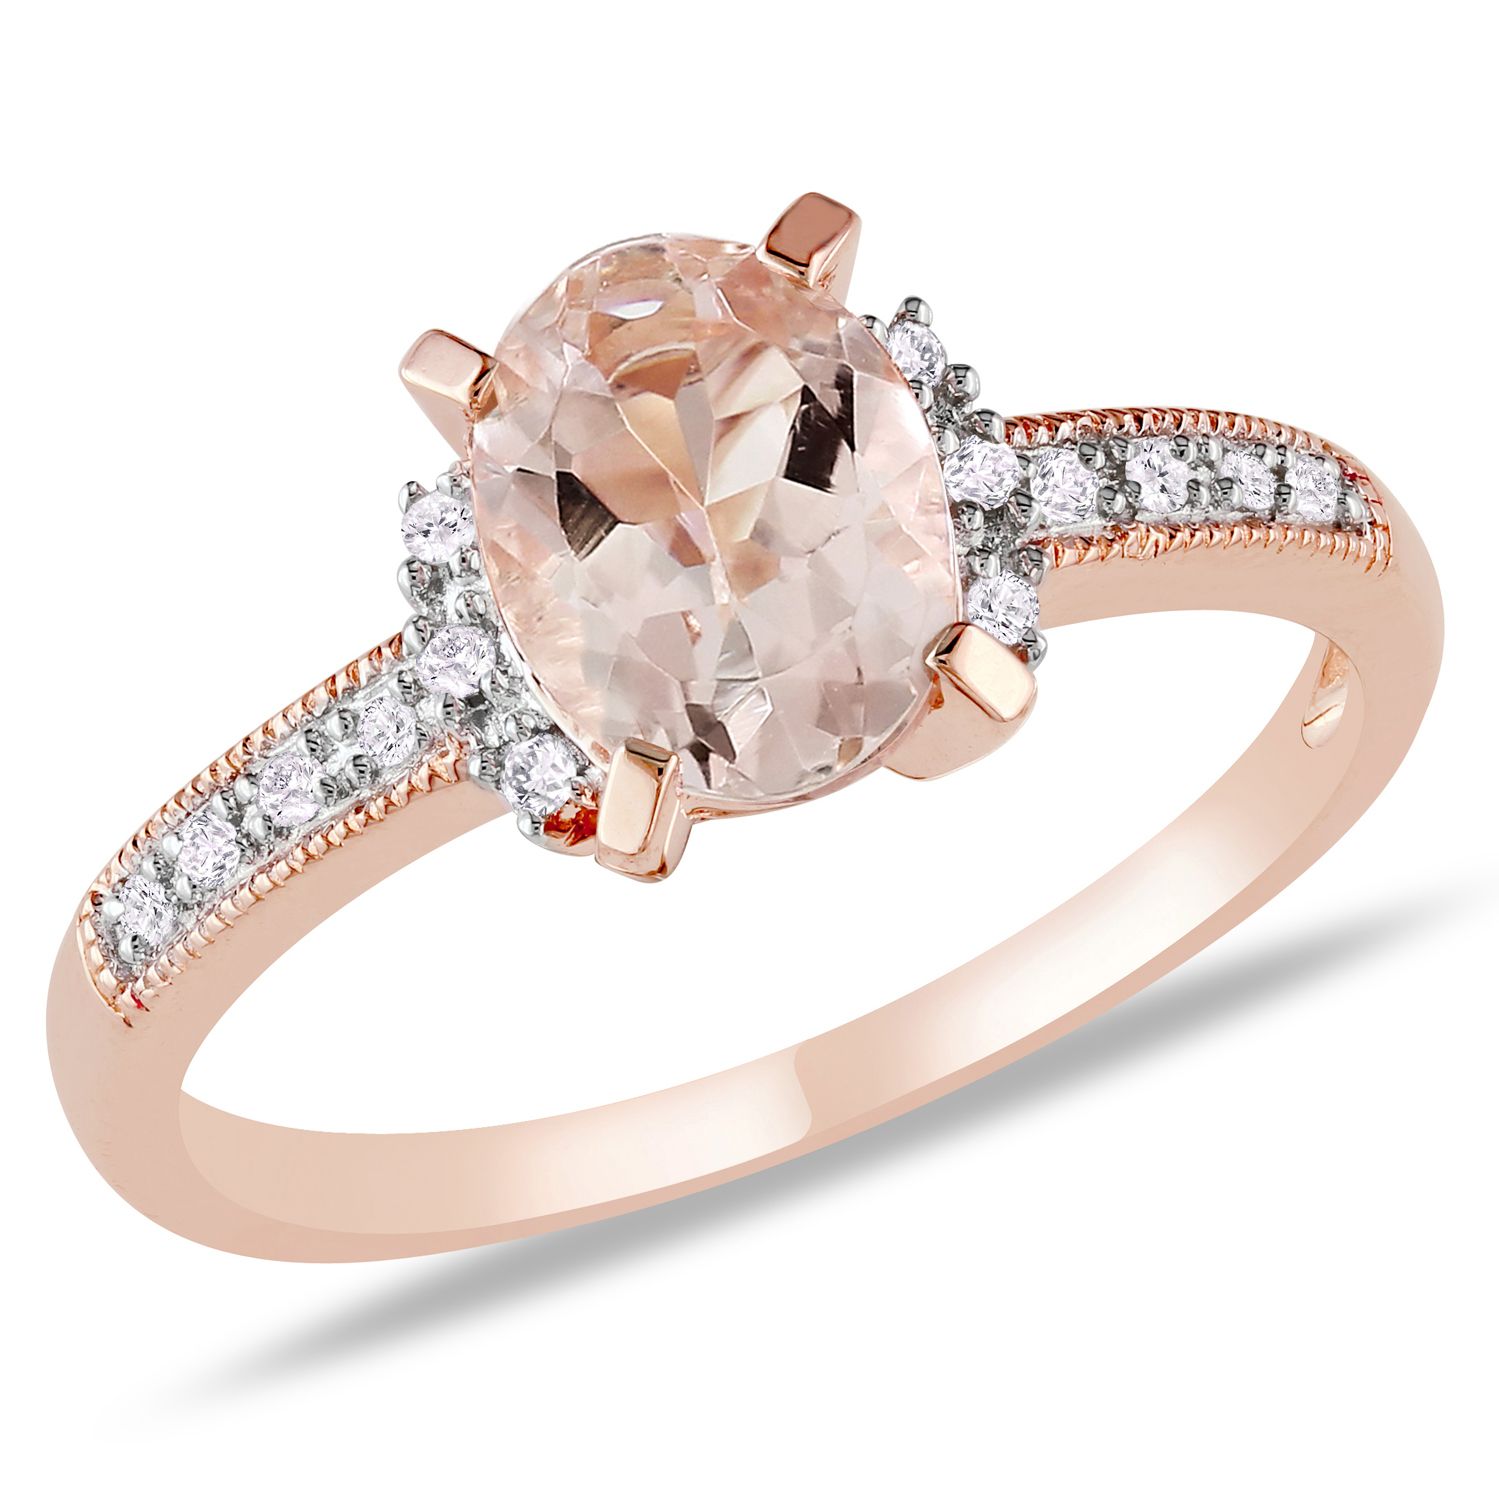 Amour 0.07 Carat T.W. Diamond and 1 1/7 Carat T.G.W. Morganite Fashion Ring Pink Sterling Silver GH I2;I3